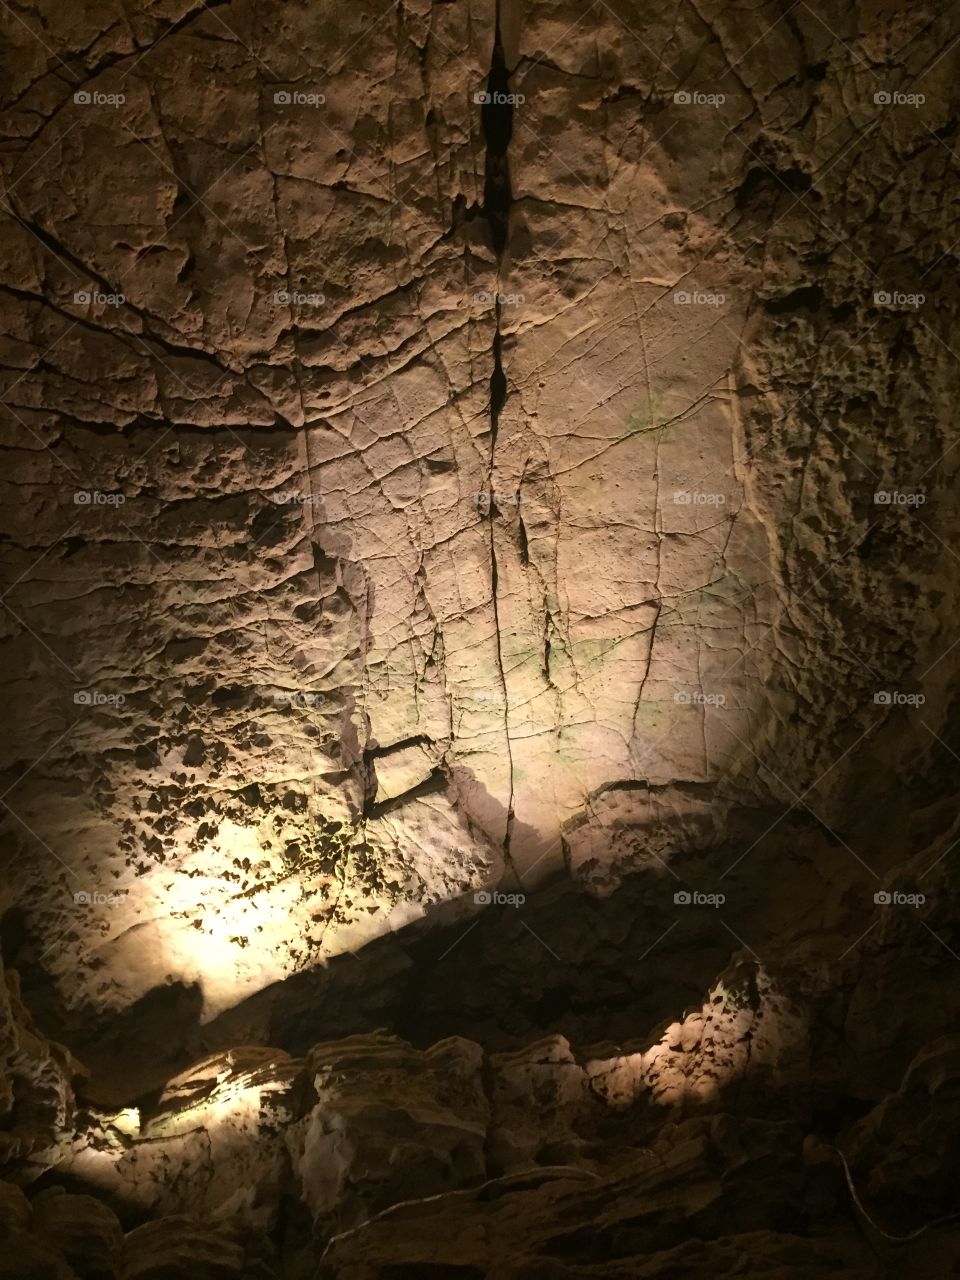 A spotlight shown on the wall of a cave producing a stunning display of light and shadow